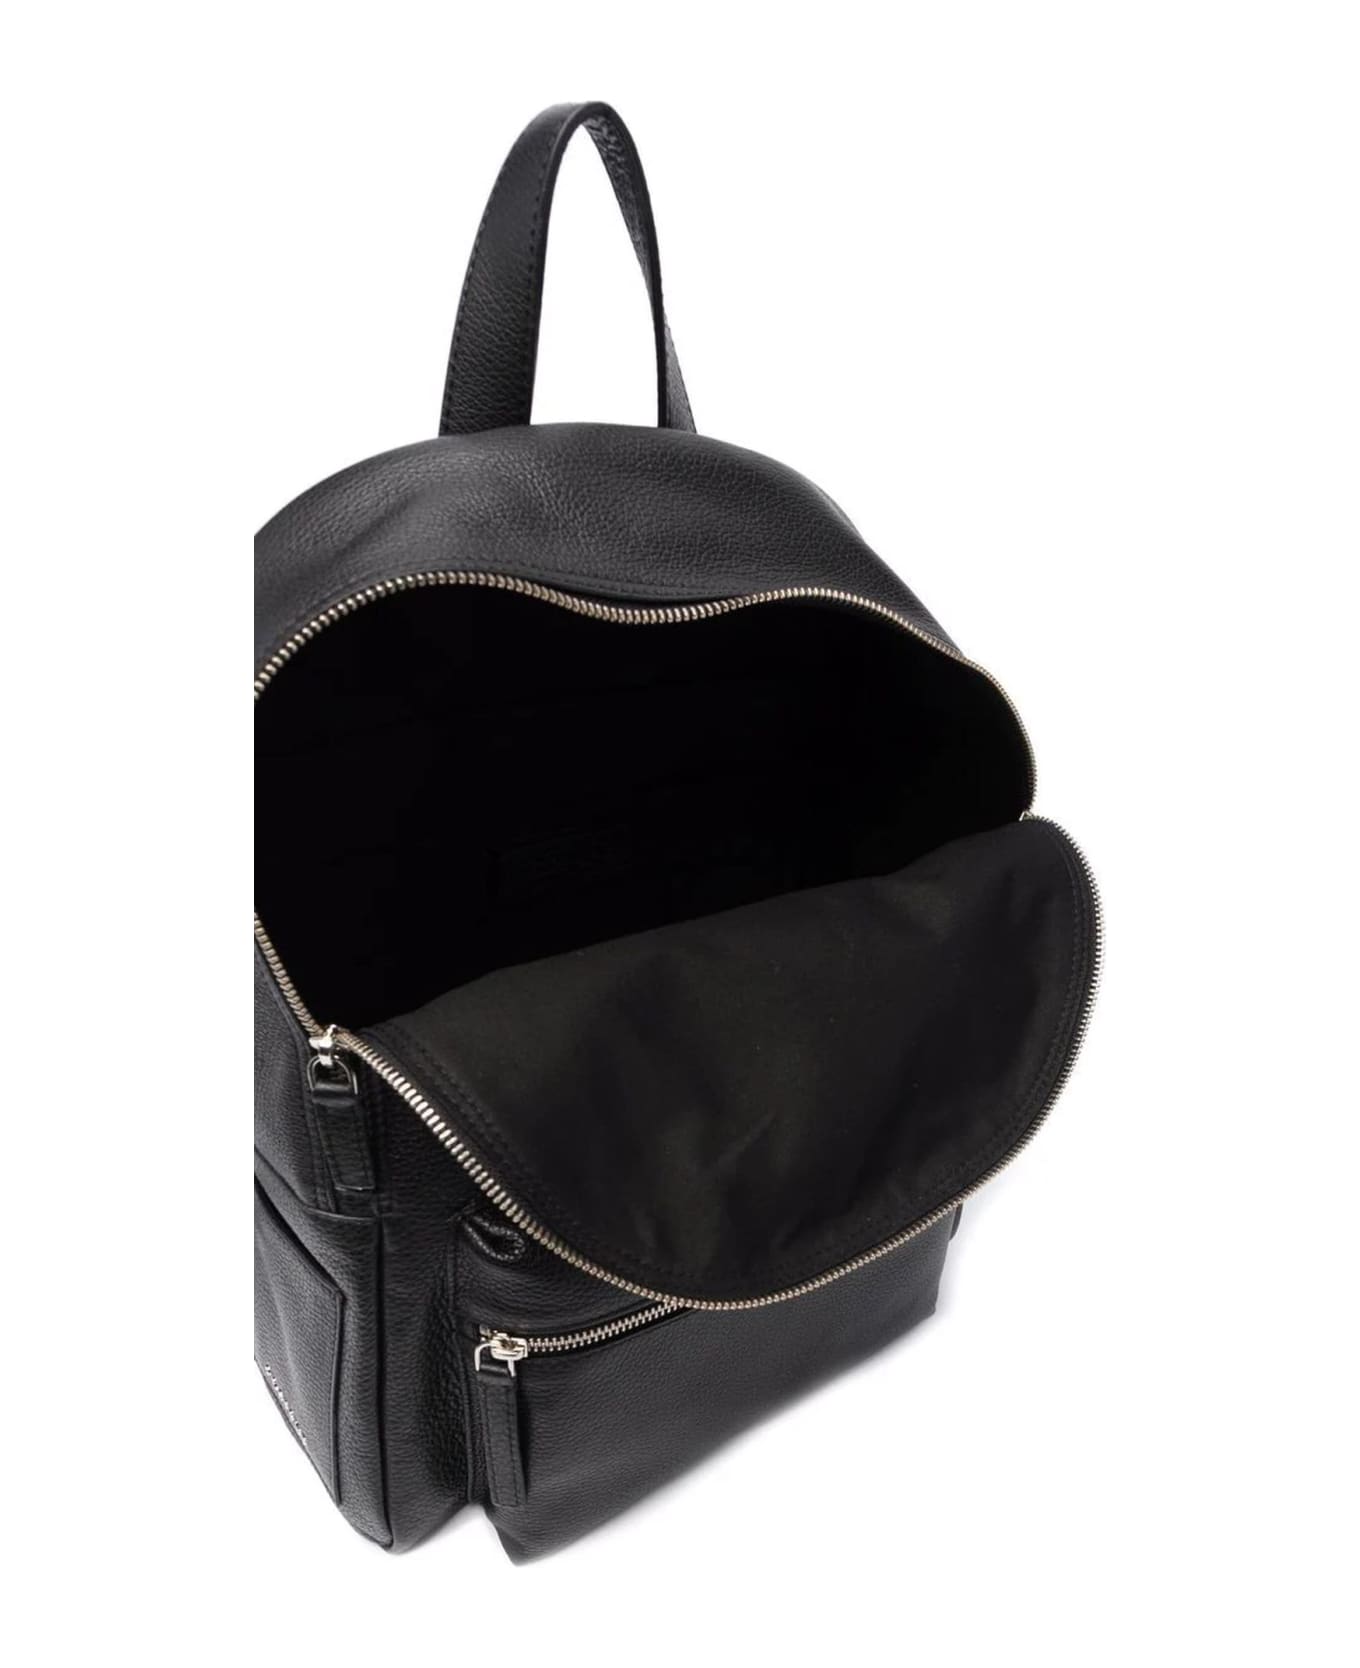 Orciani Black Calf Leather Micron Backpack - Black